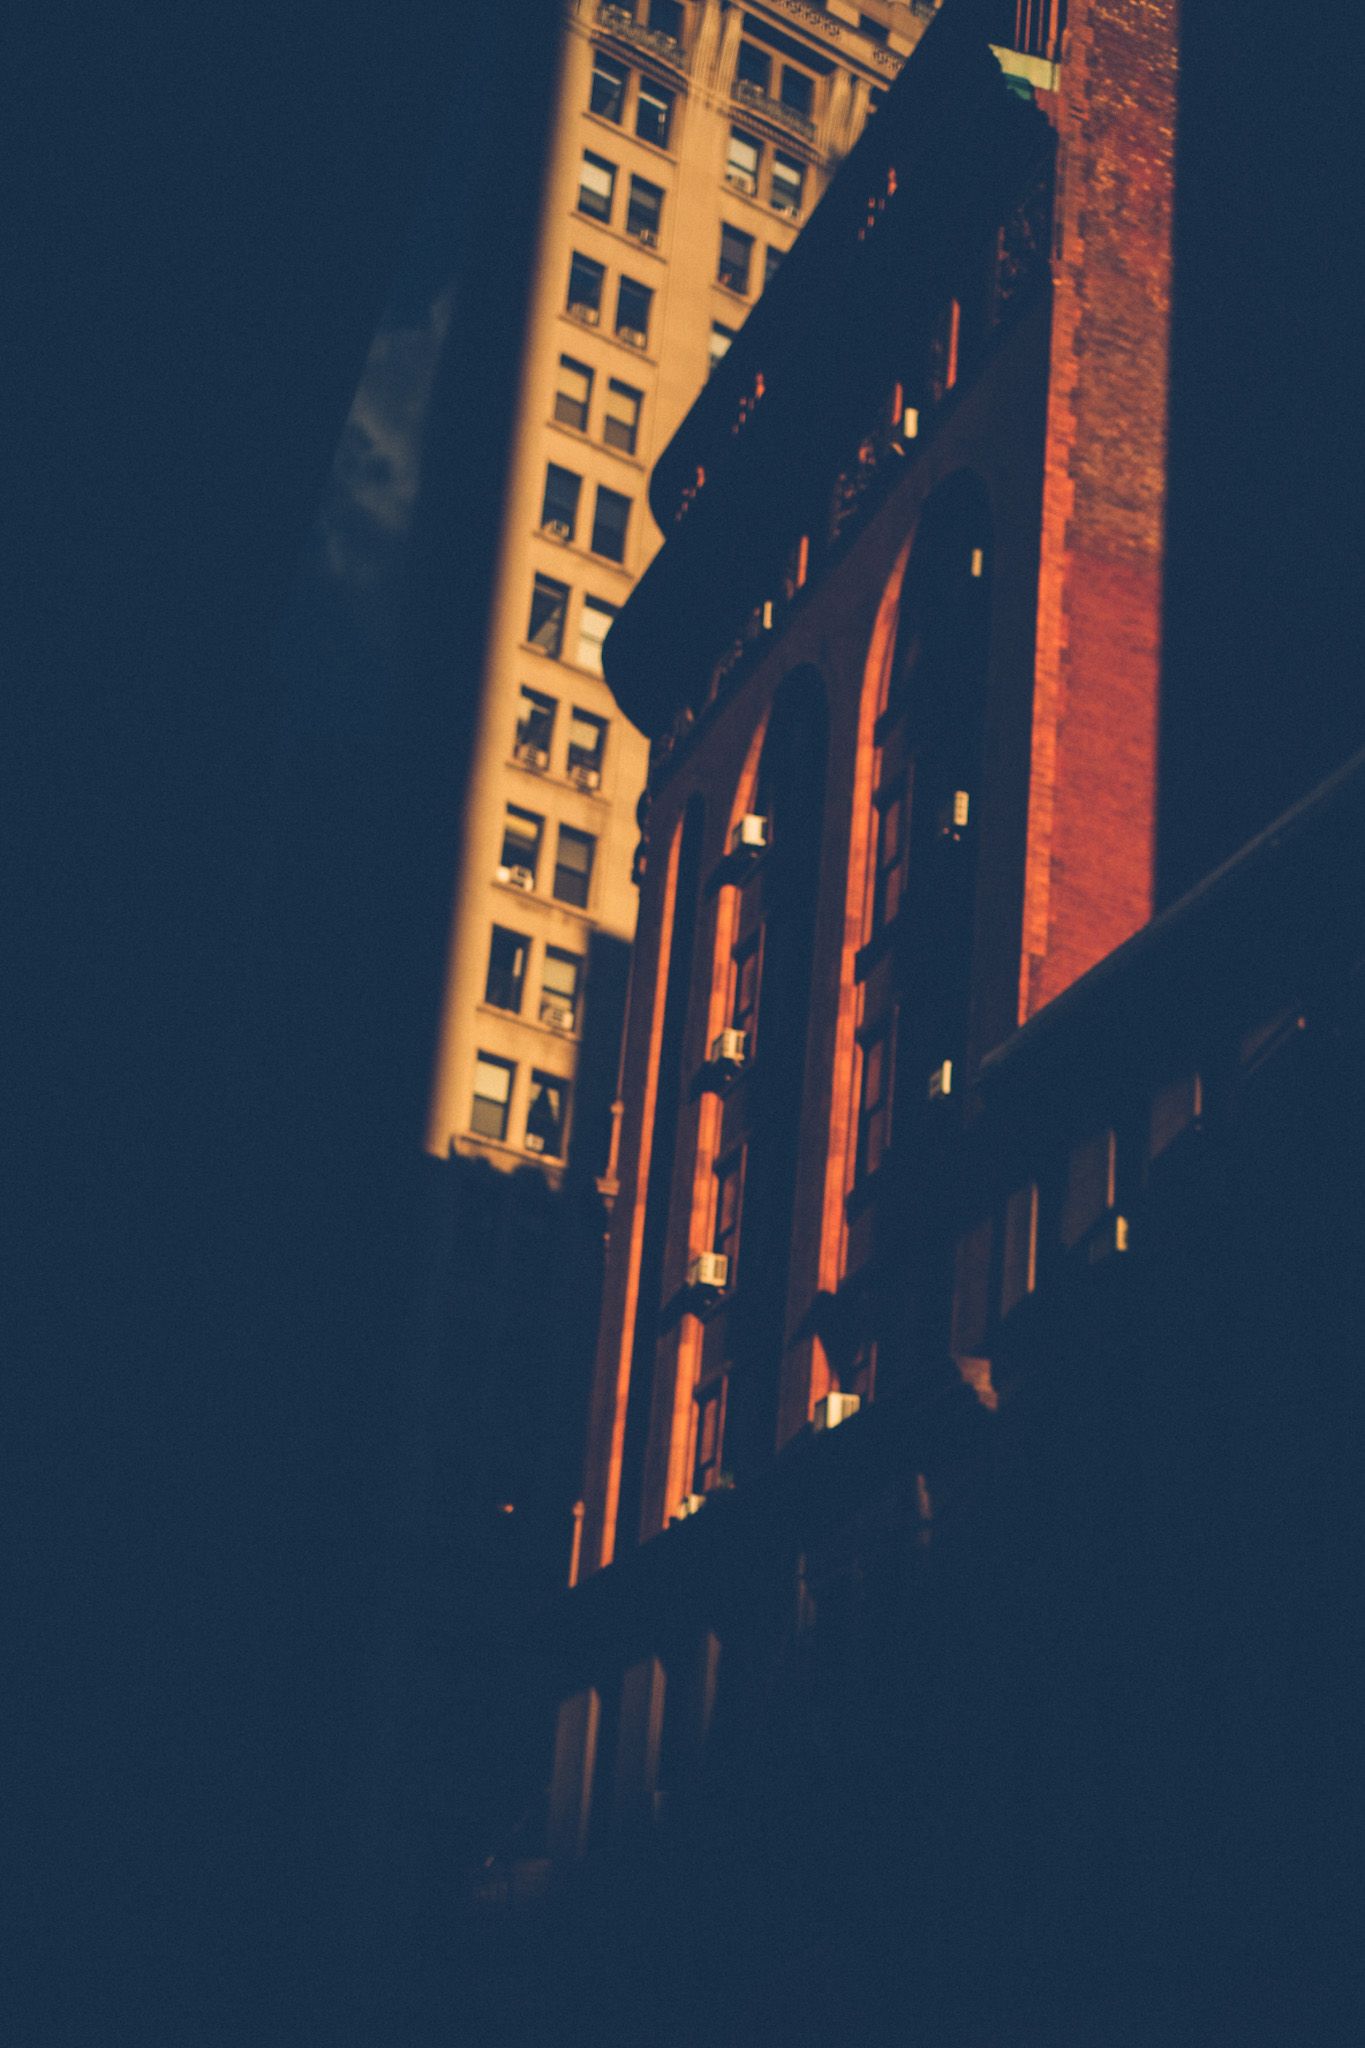 Amid harsh shadows near sunset, tall red brick buildings rise out of the frame.